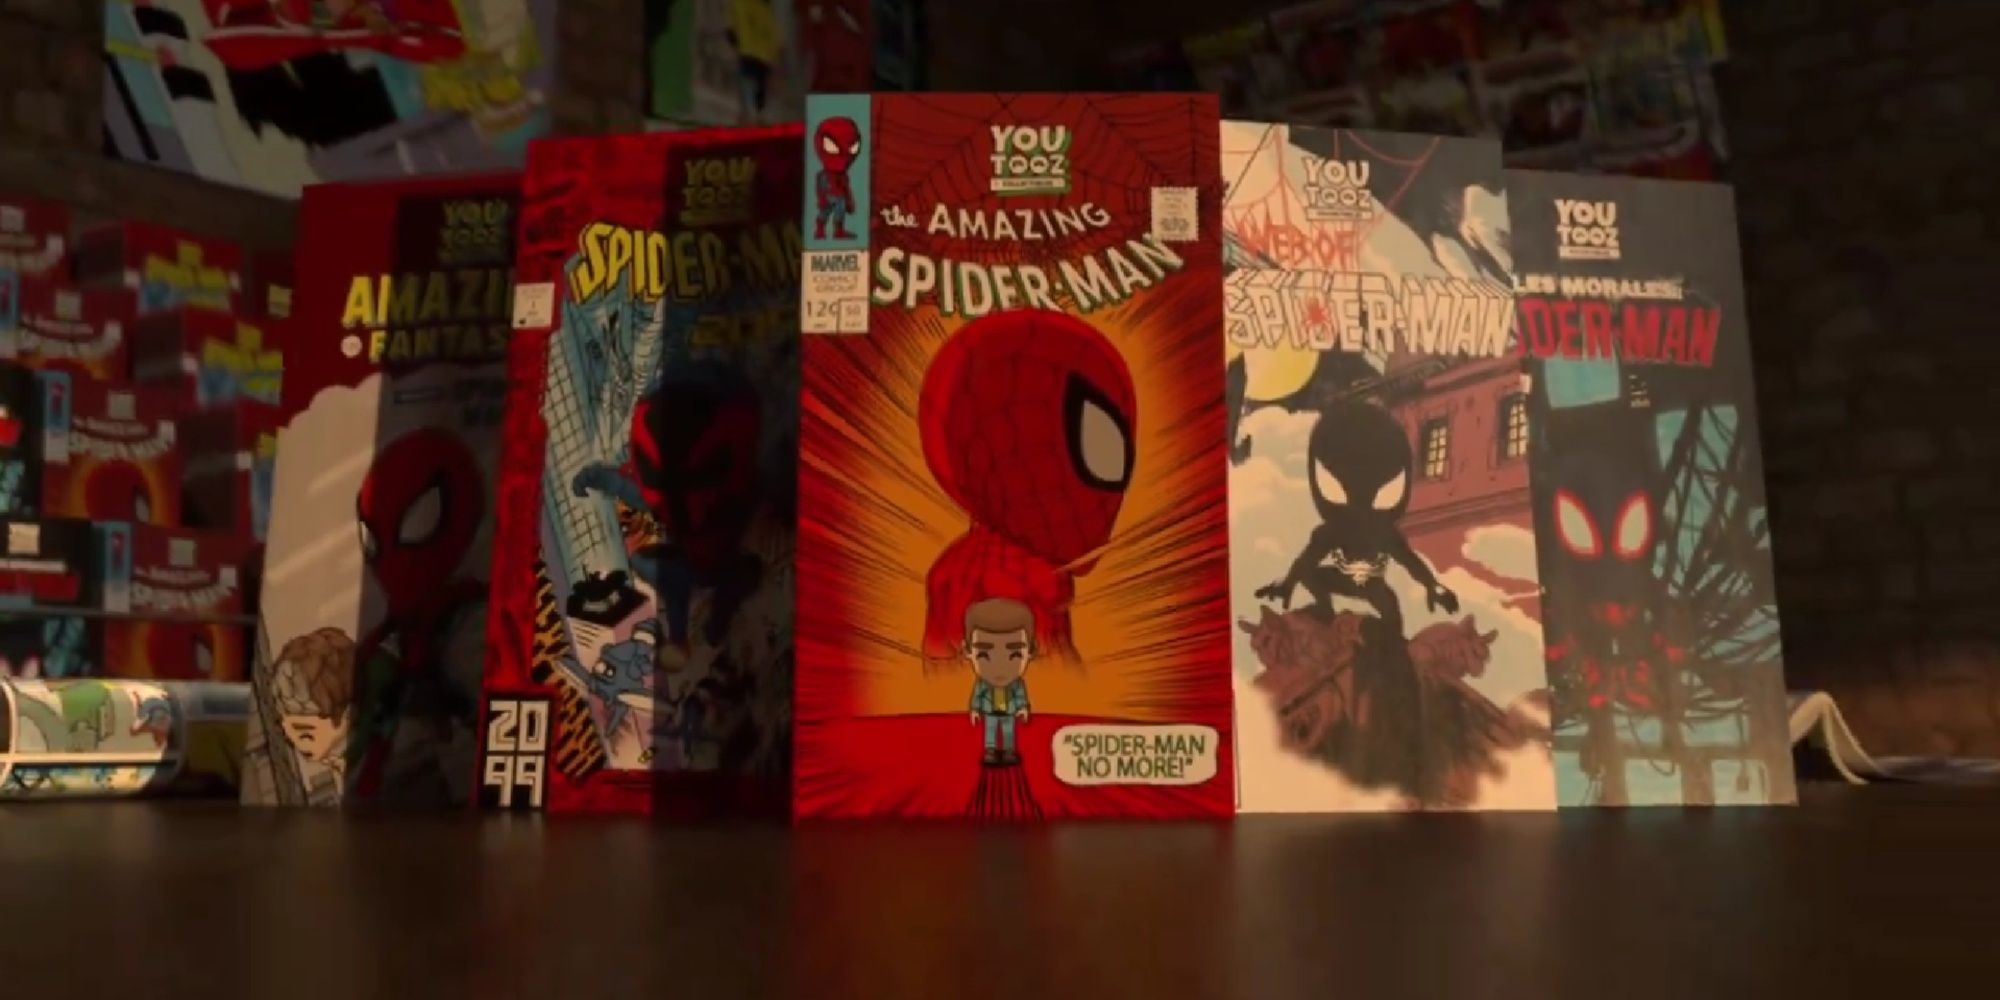 spider-man youtooz comic book covers